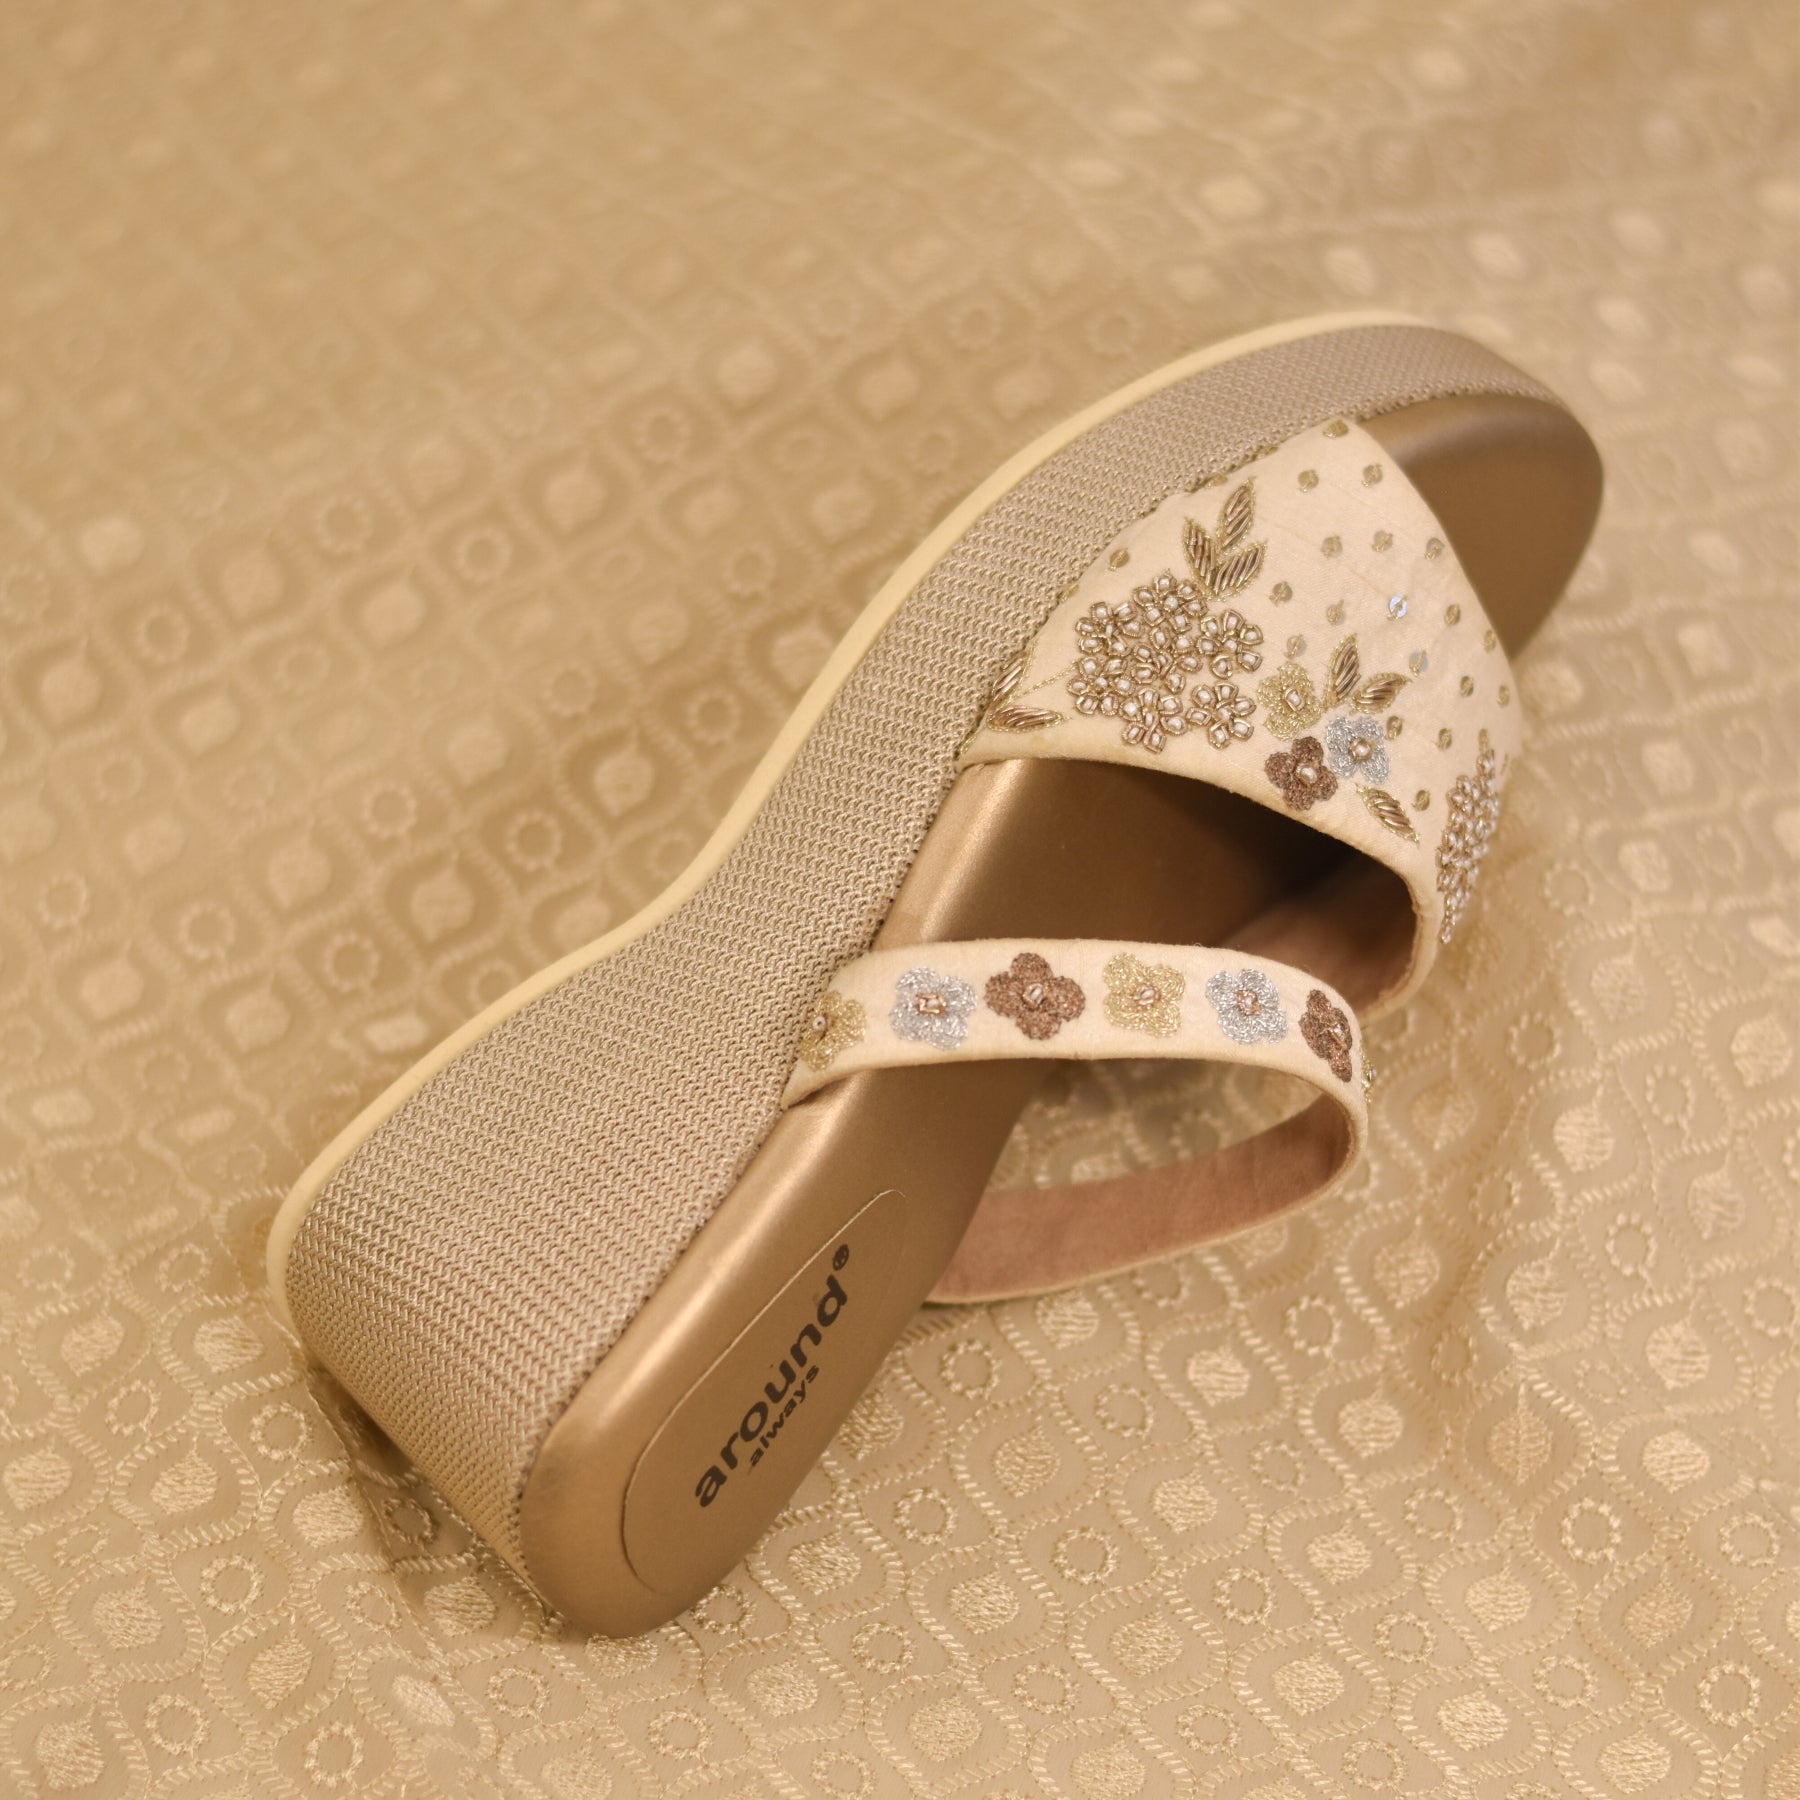 High heel golden wedges with light embroidery